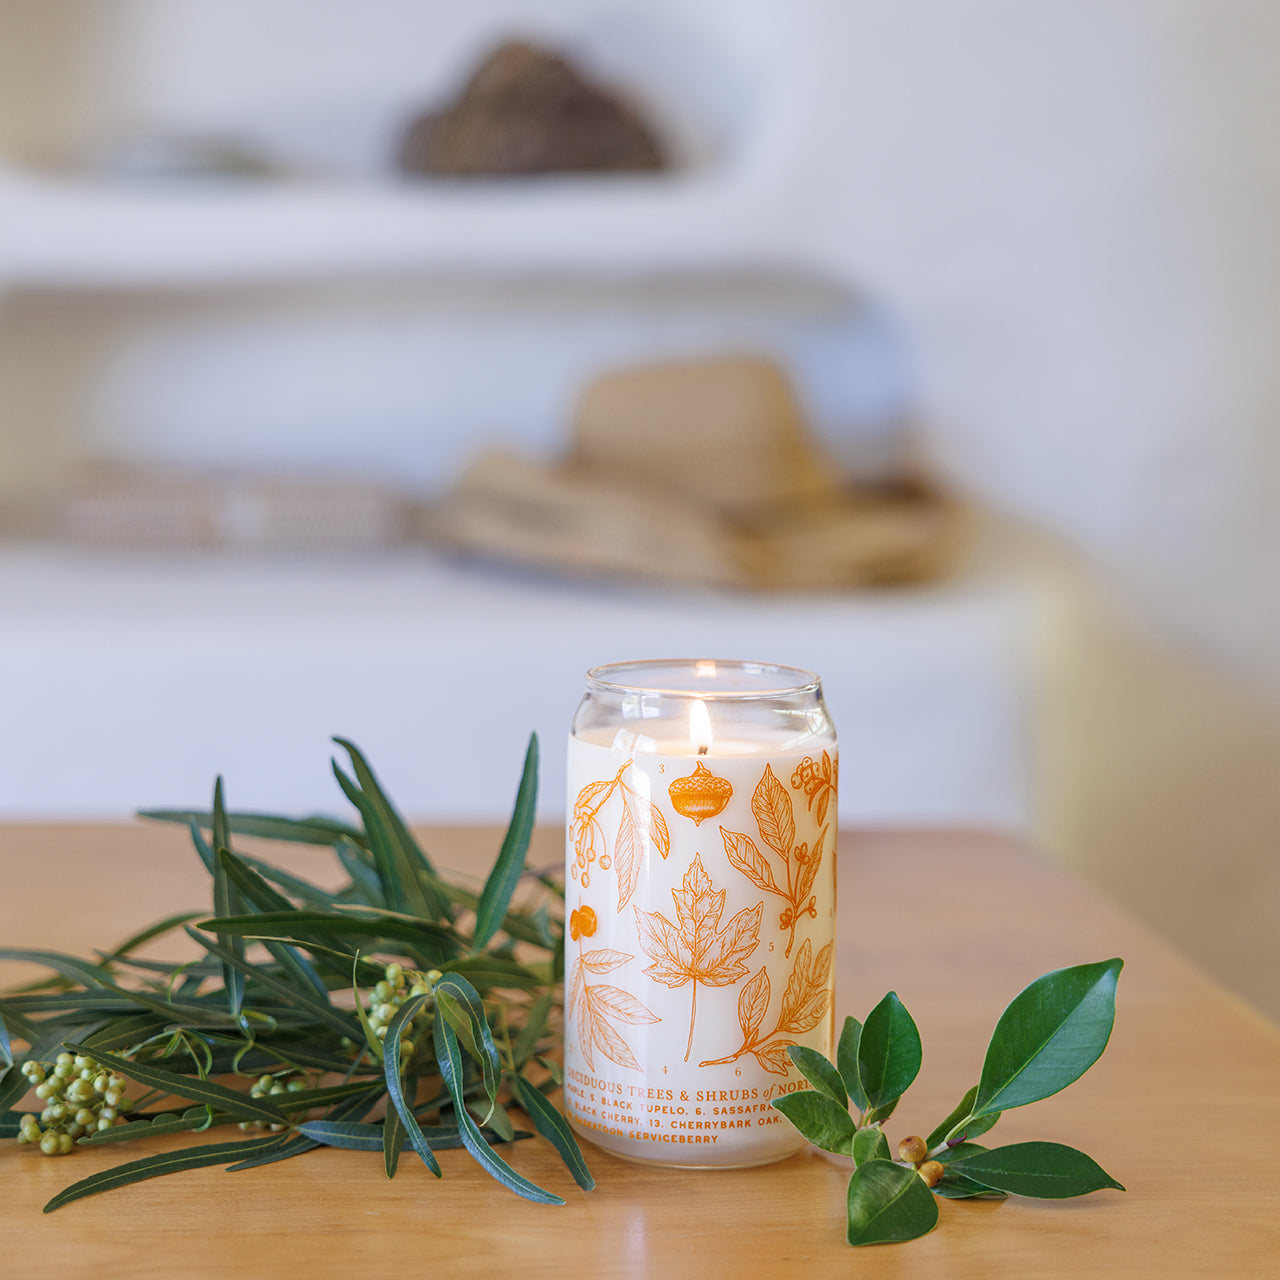 Deciduous Trees & Shrubs Soy Candle